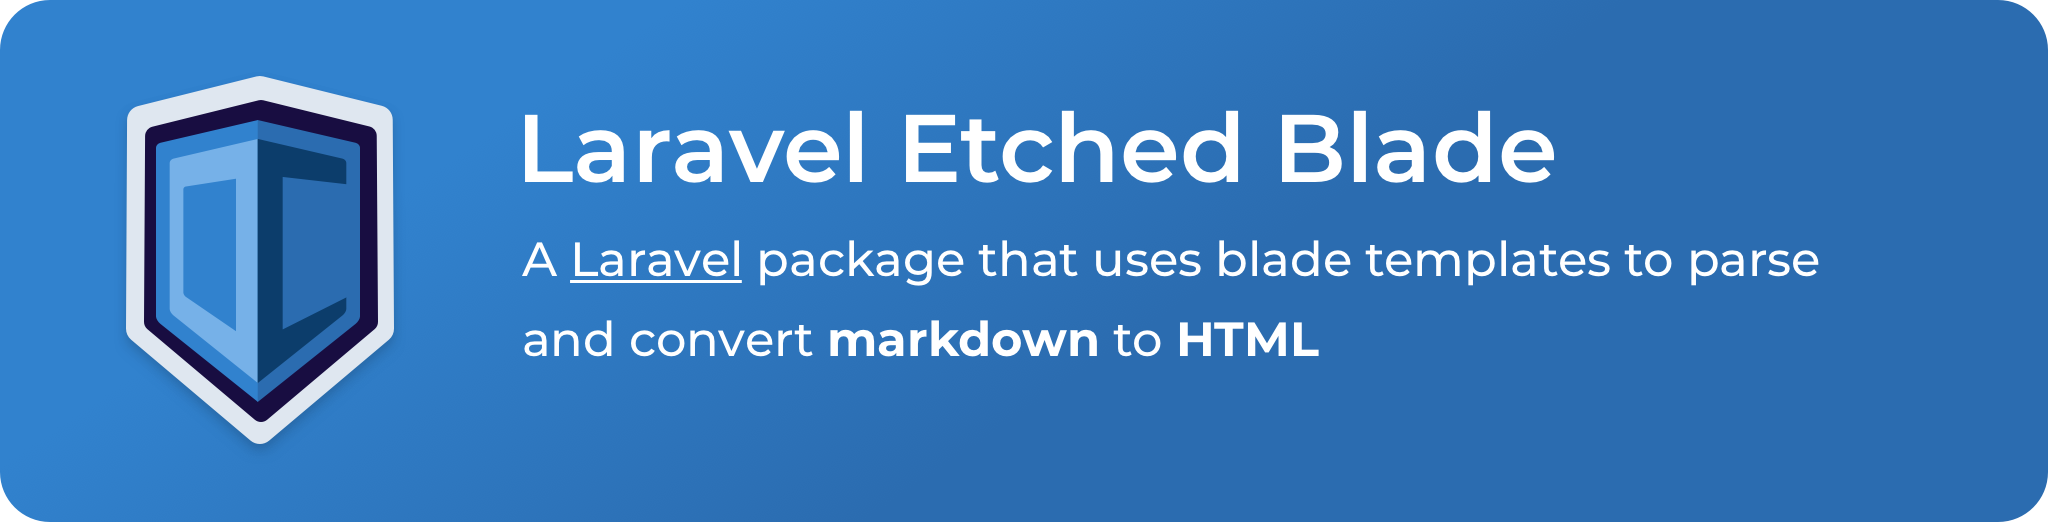 A Laravel package that uses blade templates to parse and convert markdown to HTML